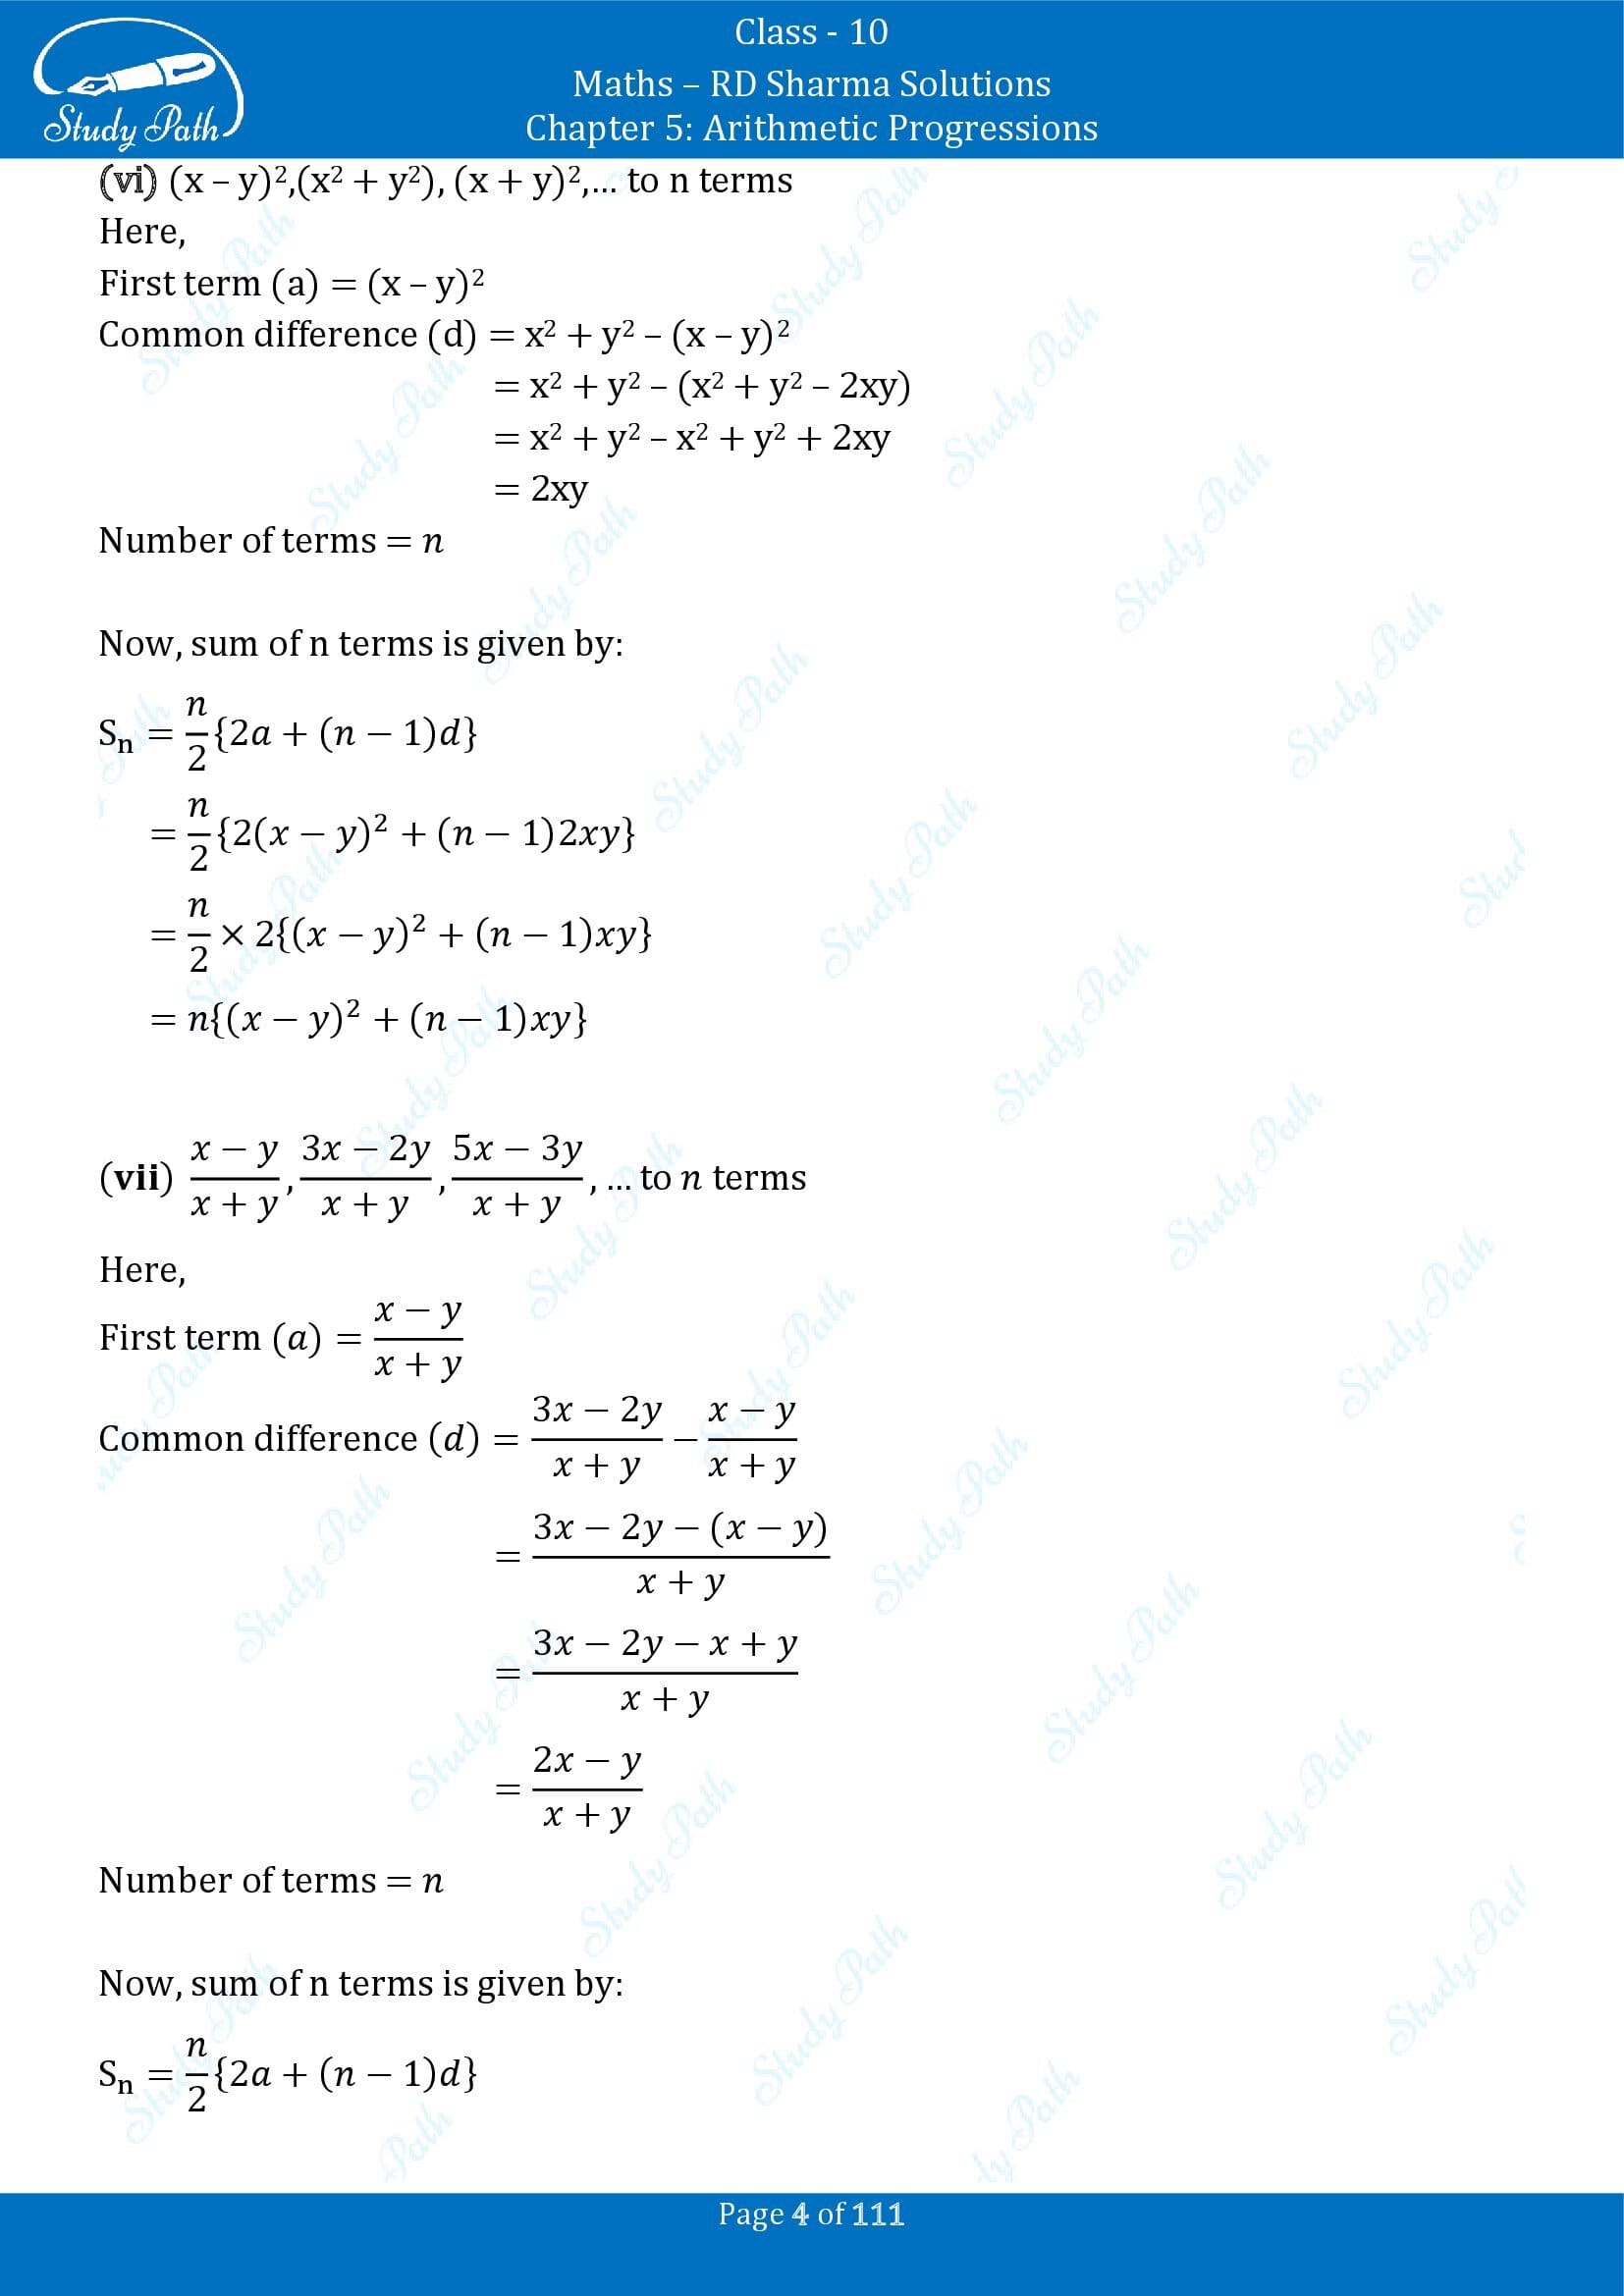 RD Sharma Solutions Class 10 Chapter 5 Arithmetic Progressions Exercise 5.6 00004